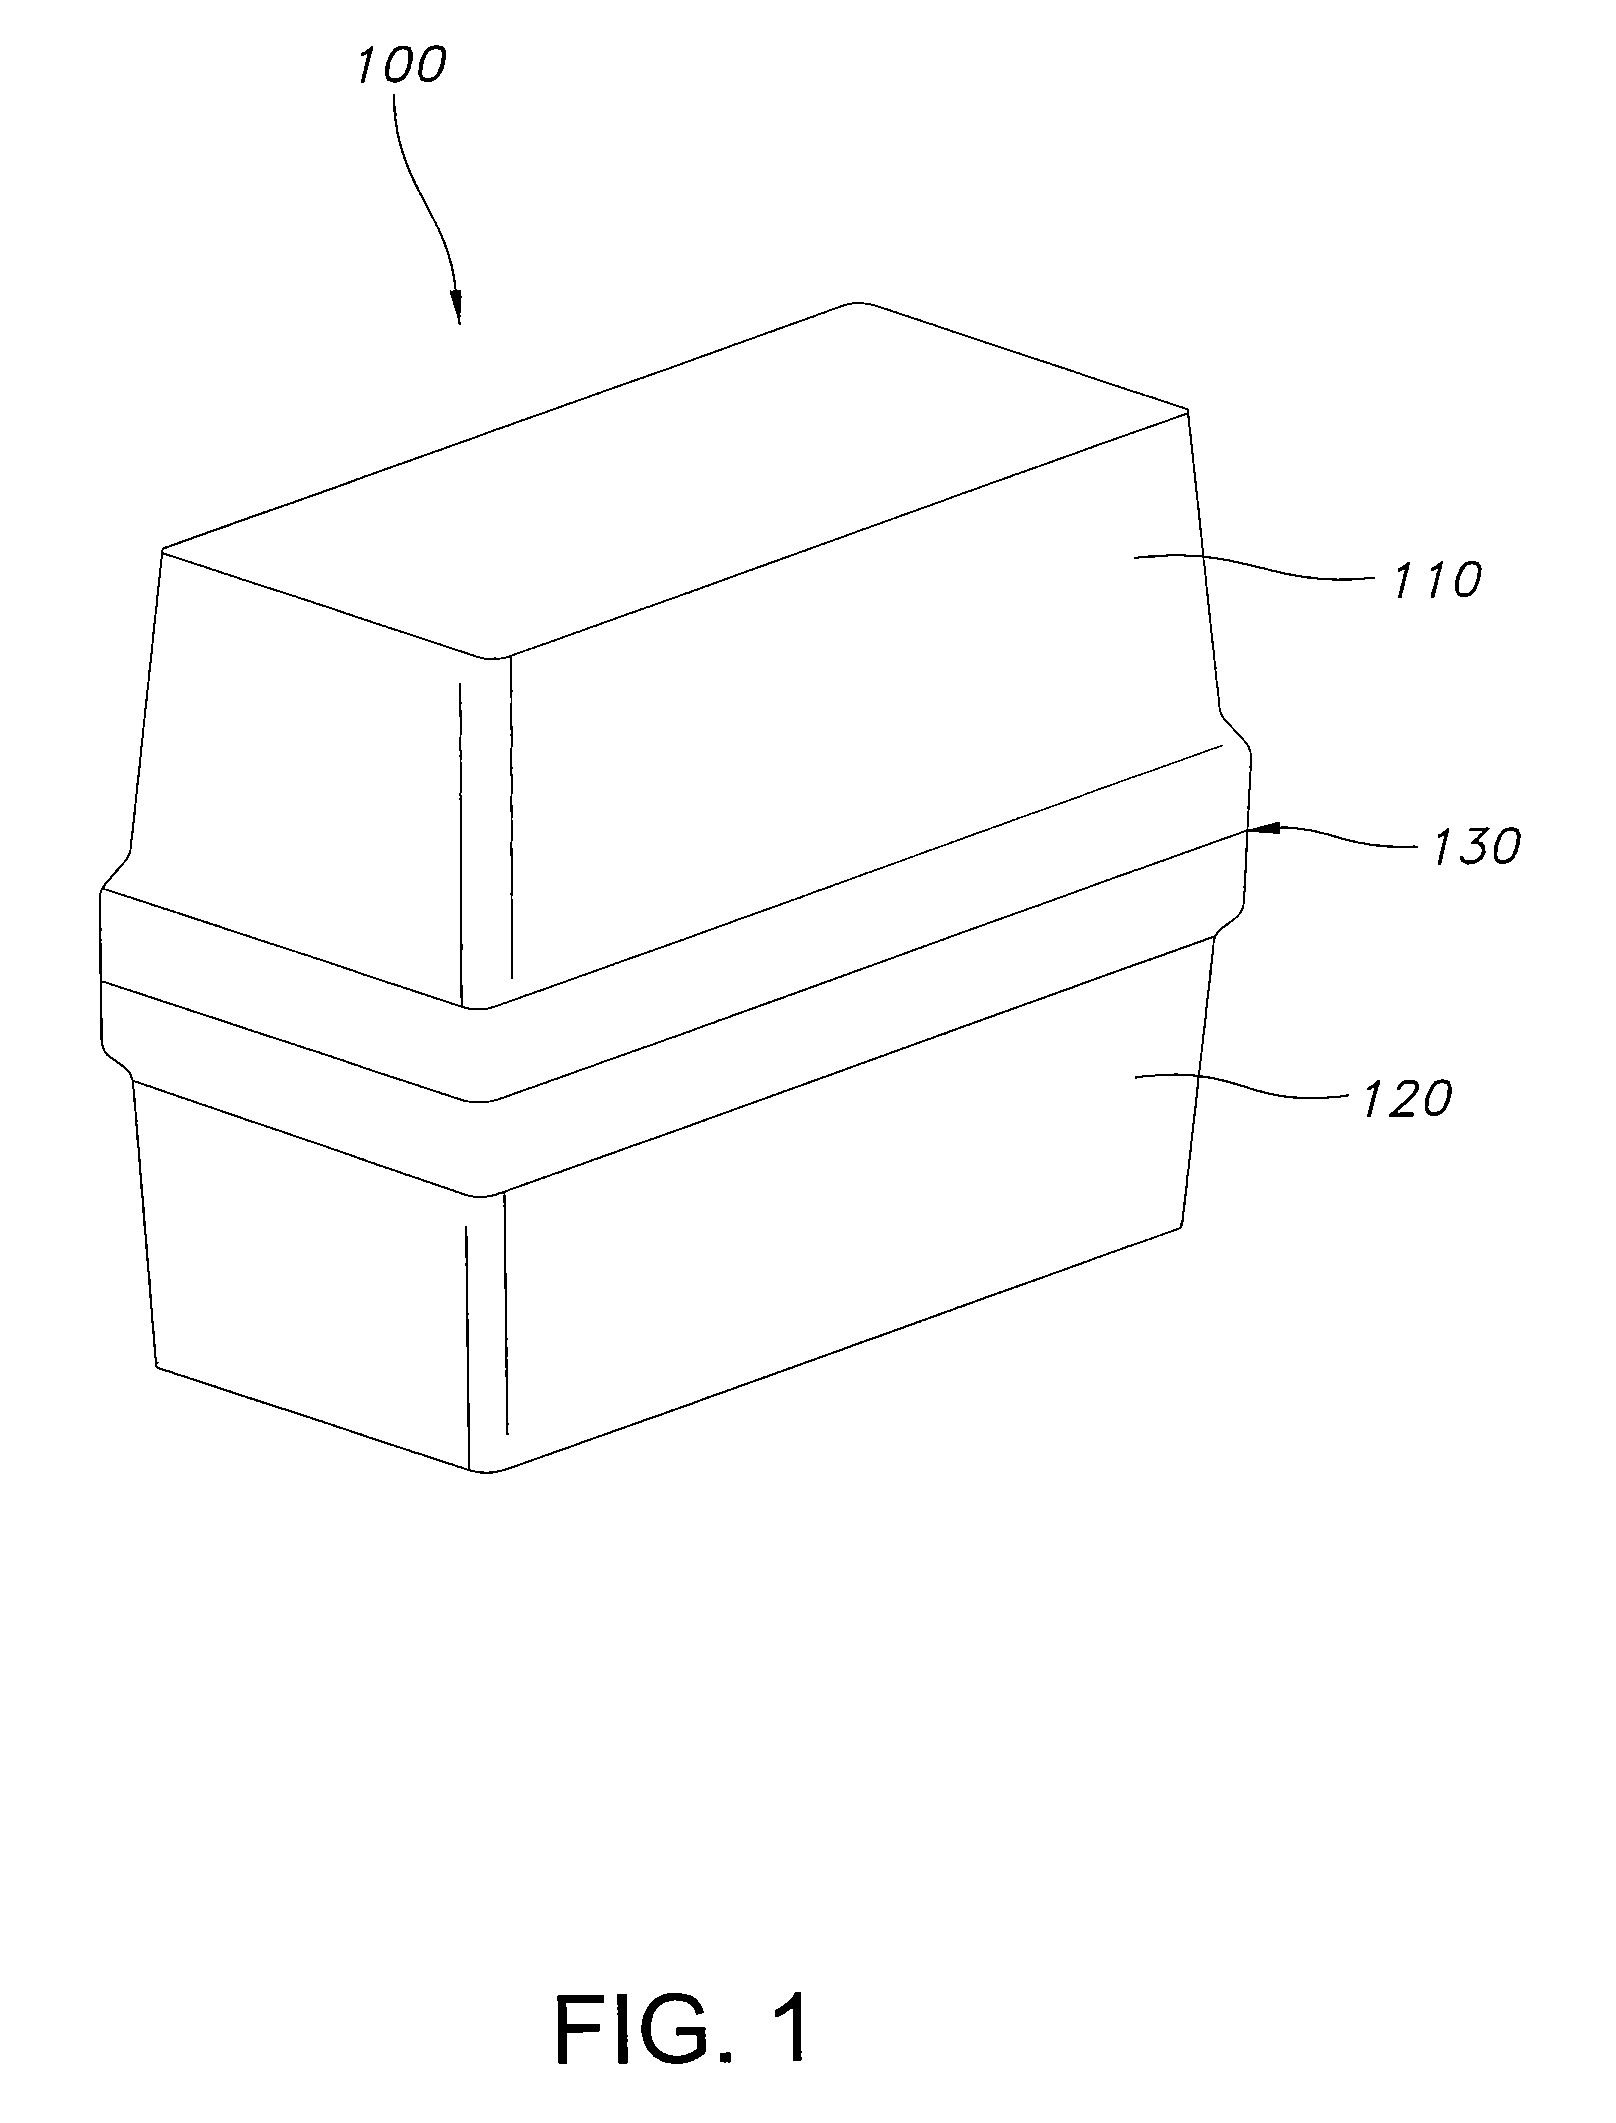 Electro-conductive contact structure for enclosure sealing in housings